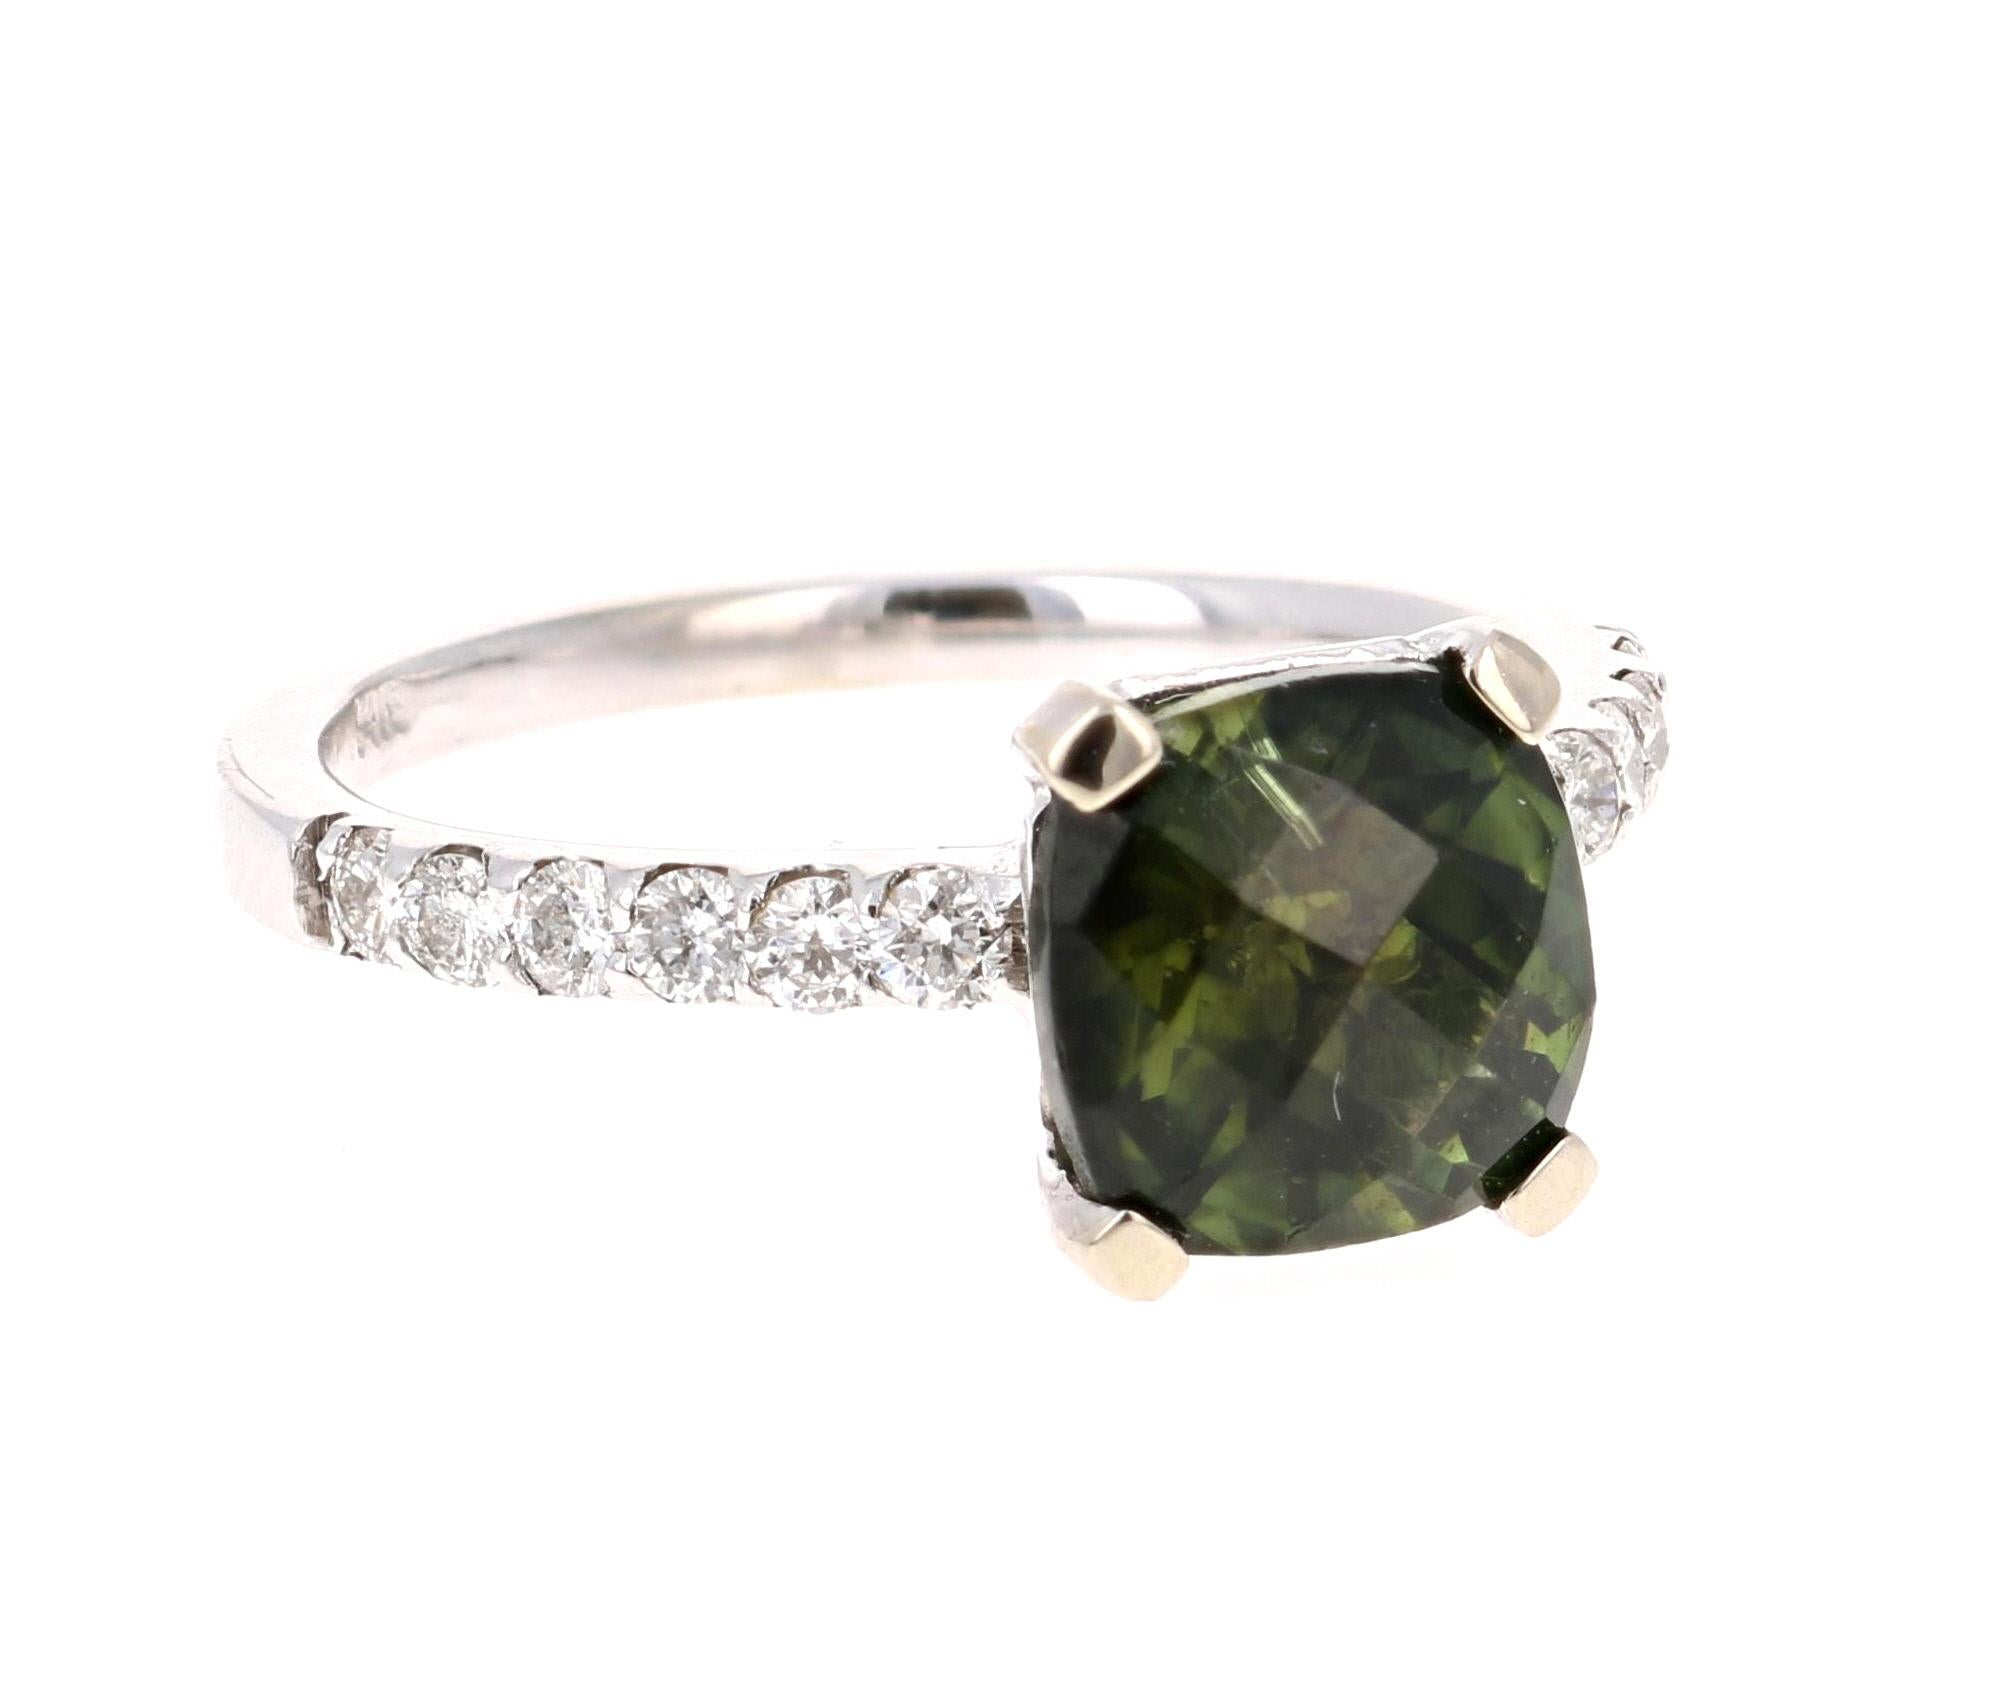 A beautiful classic setting that is sure to be a great addition to your accessory collection! 

This stunner has a Cushion Cut Green Tourmaline that weighs 2.40 Carats. Adjacent to the tourmaline are 12 Round Cut Diamonds weighing 0.35 Carats.  The